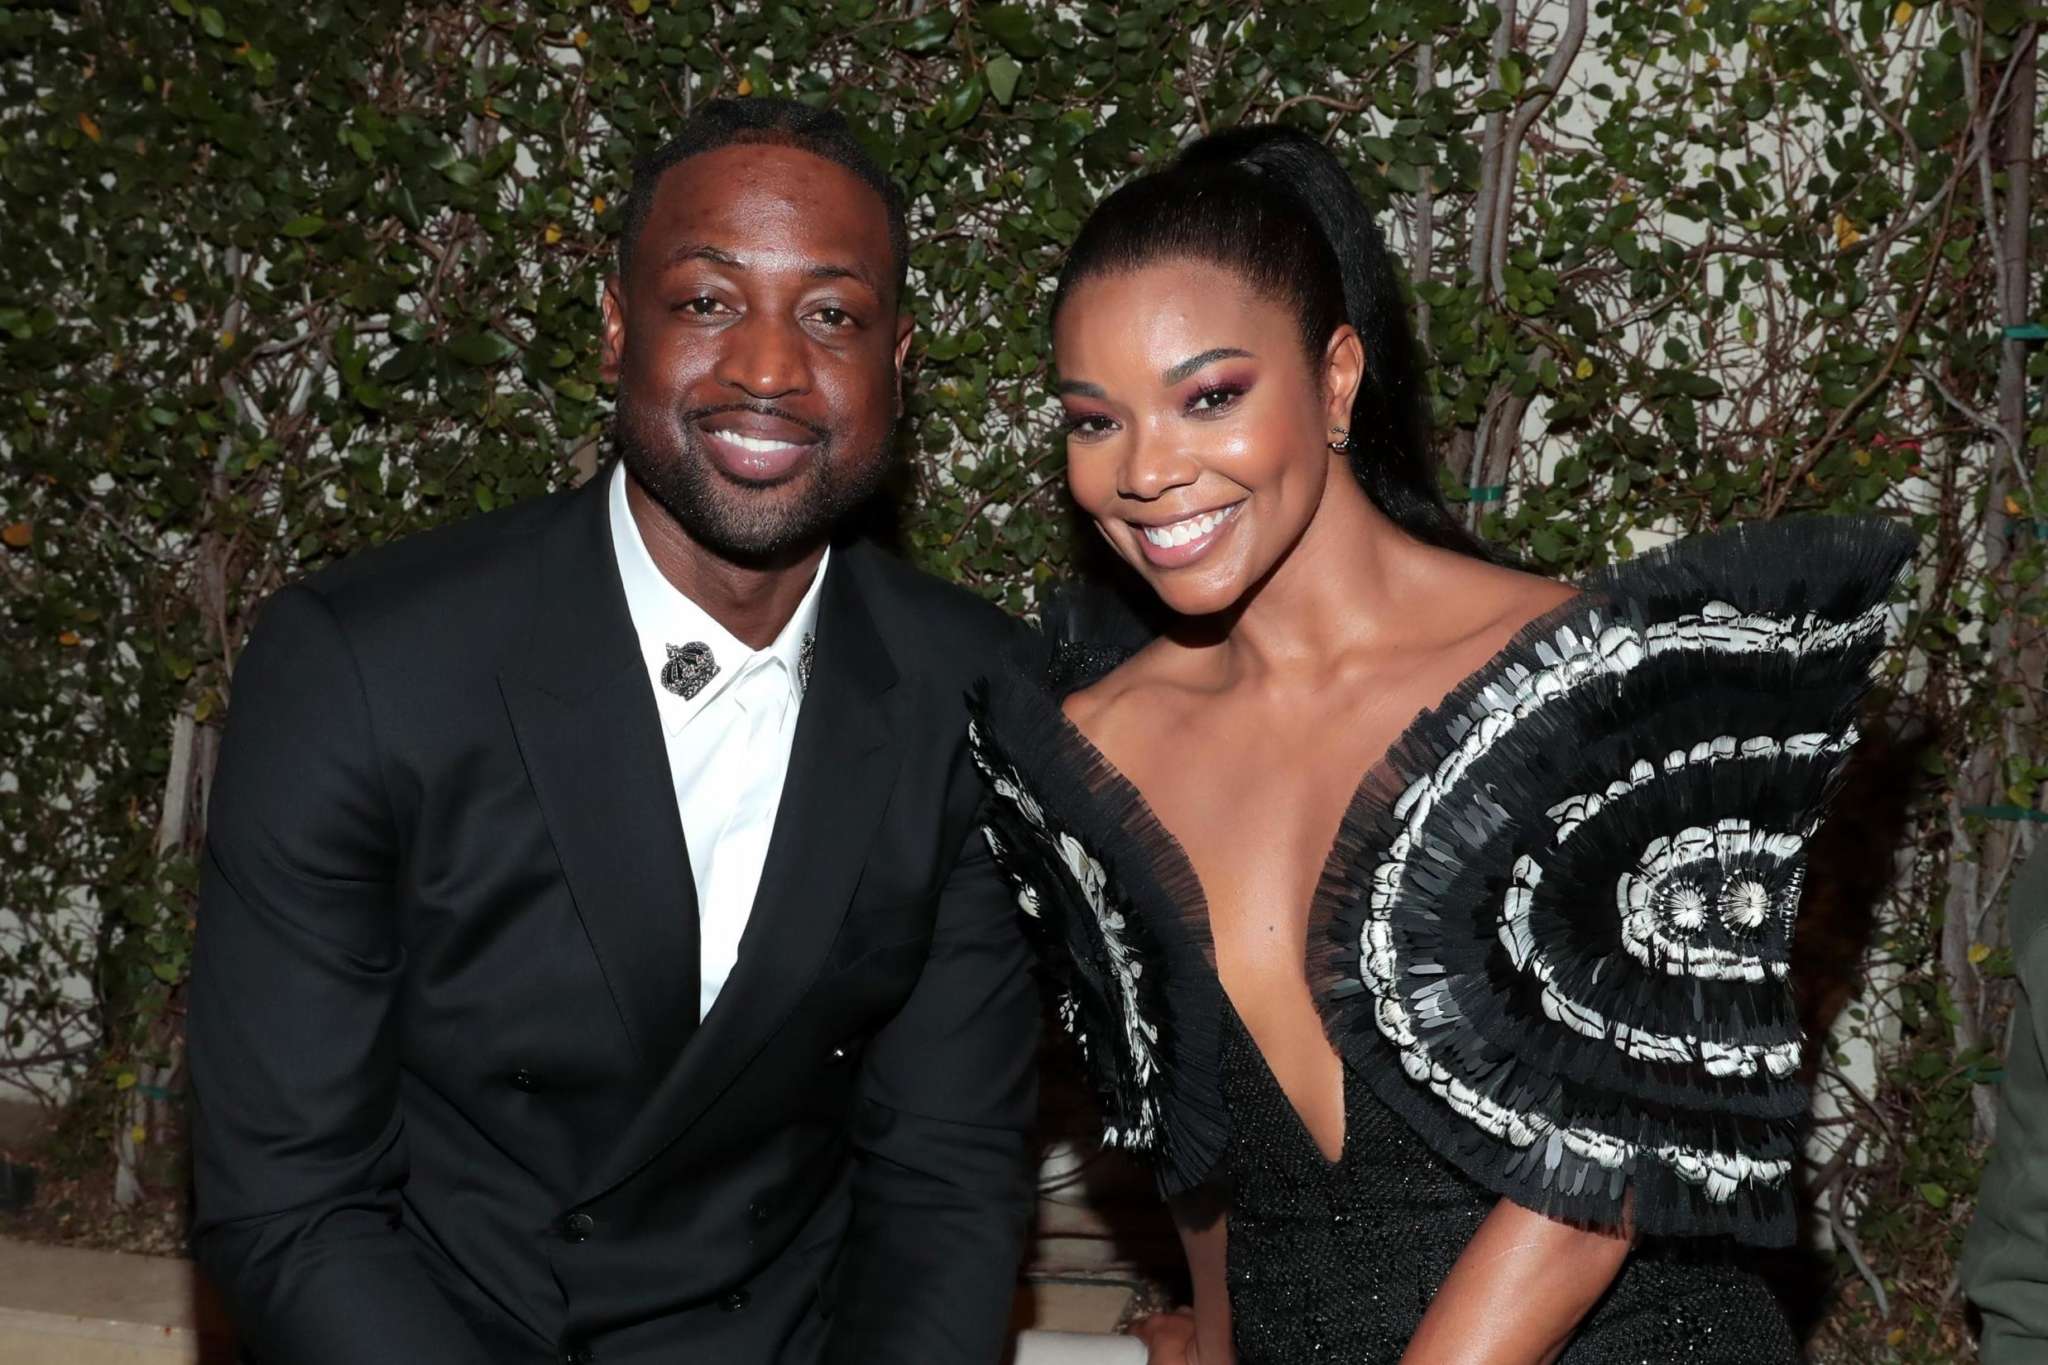 Gabrielle Union Is Living Her Best Life With Dwayne Wade And Their Kids - See The Happy Photos She Shared